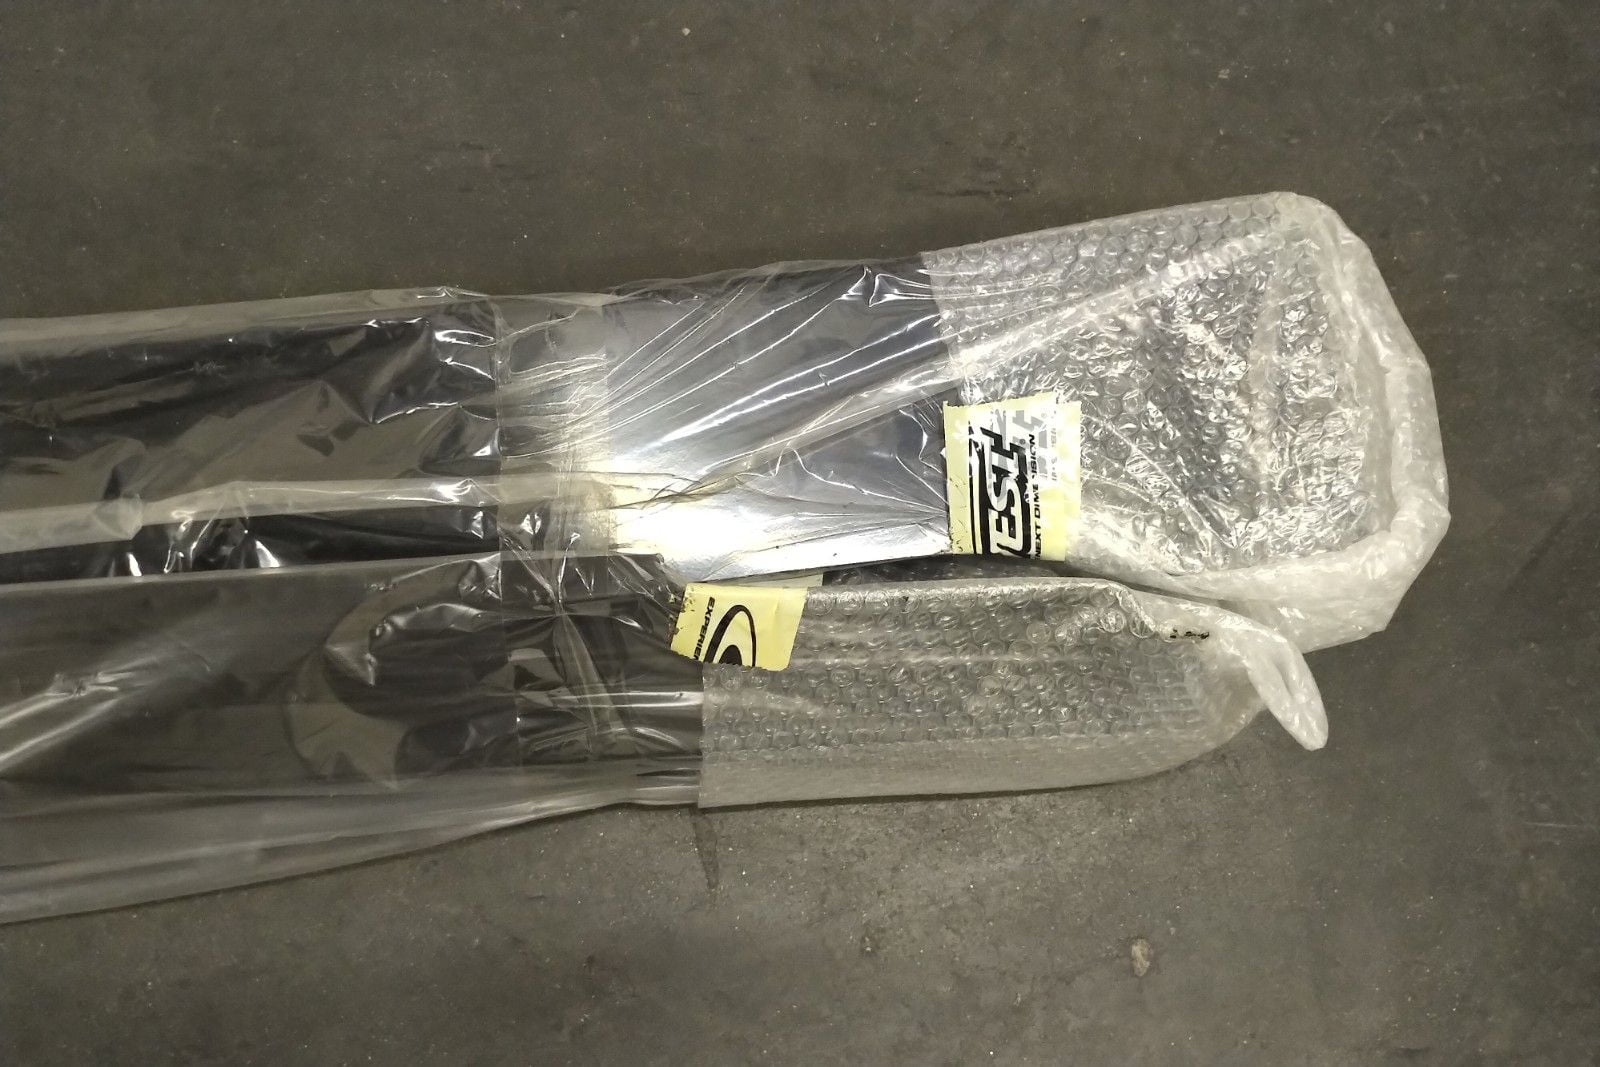 Miscellaneous - Mass Part Out - Aftermarket New Used - OE Exhaust - Used - Whittier, CA 90605, United States